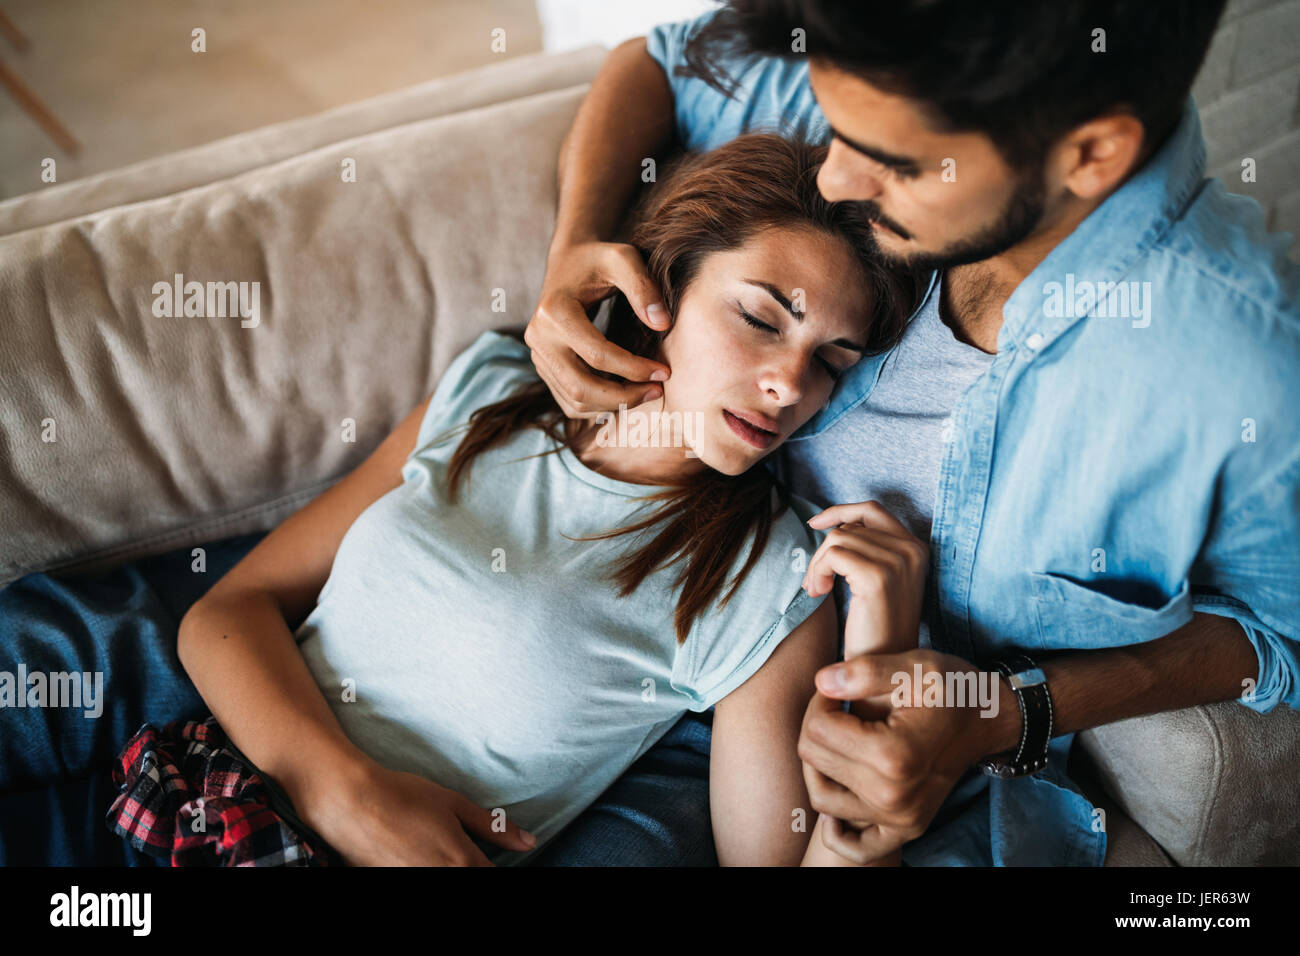 Pretty young girl lying on lap of her handsome boyfriend Stock Photo